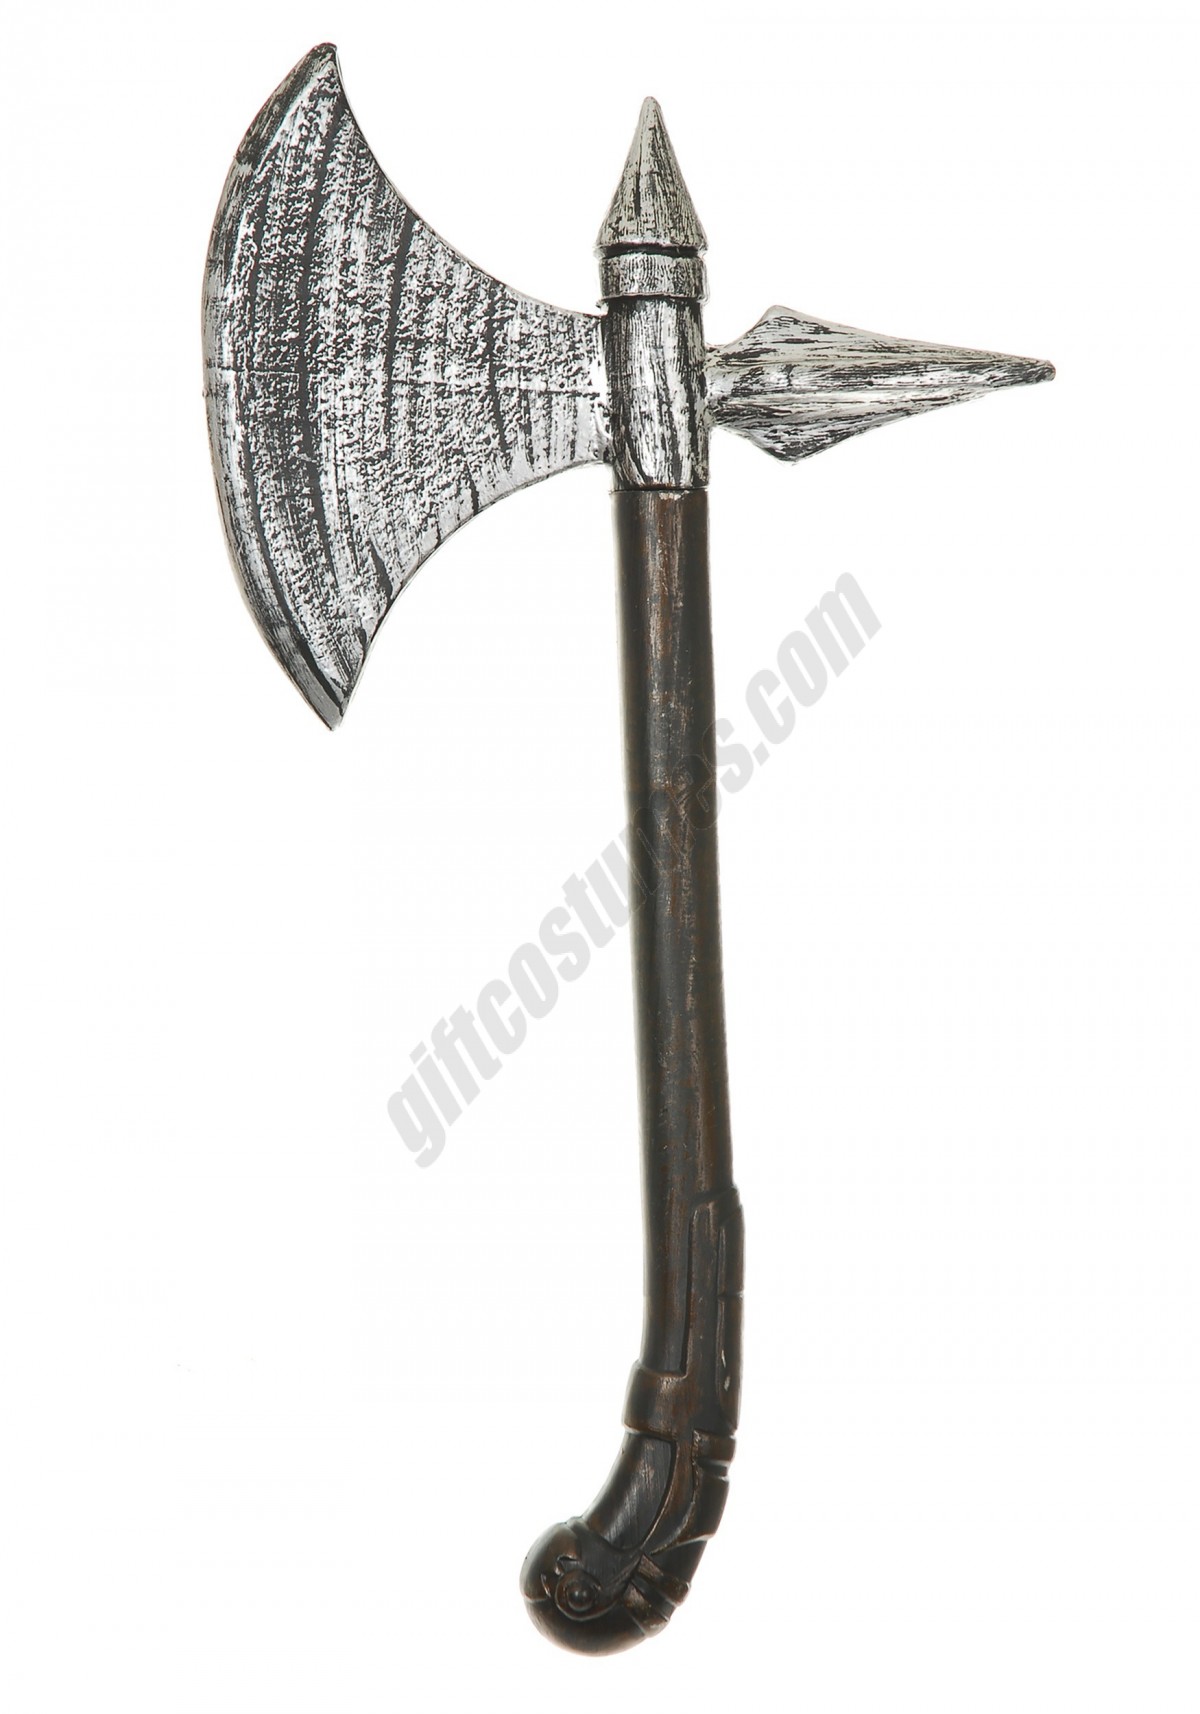 Gladiator Axe Promotions - -0